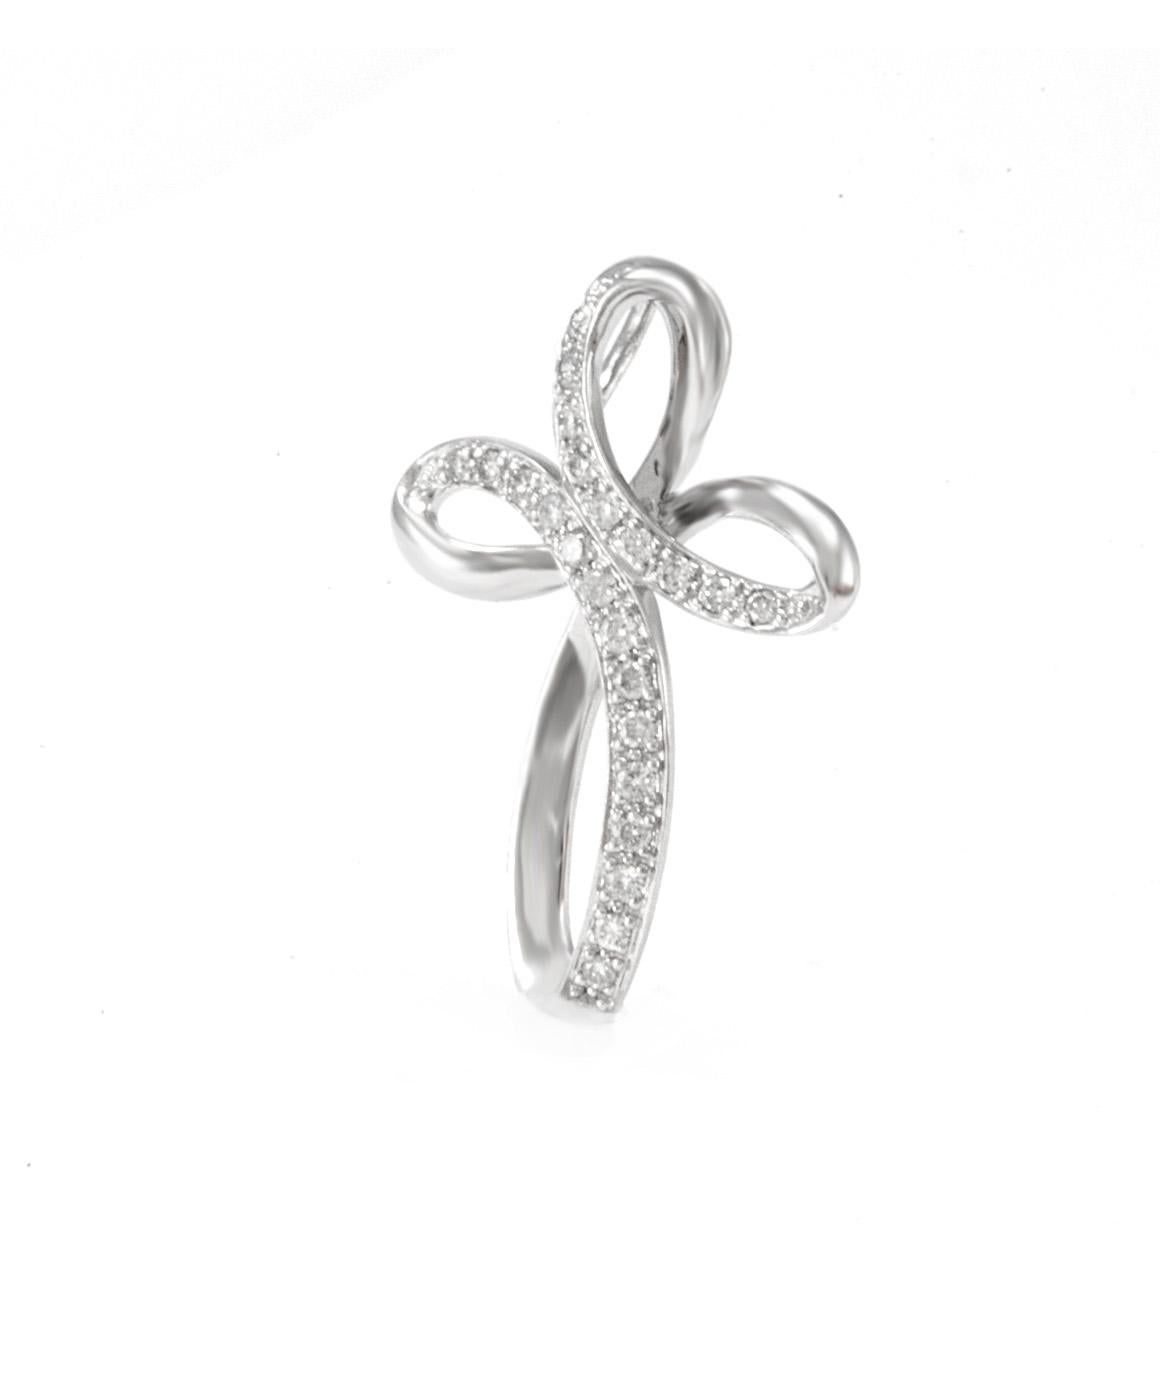 Solid 14K White Gold Natural Diamond Cross Pendant Excellent Condition! This pendant weighs 2.3 grams, and measures about 1 x .75 inches. There are 24 natural diamonds on this cross, measuring approximately 0.34cttw. Please see photos for details!